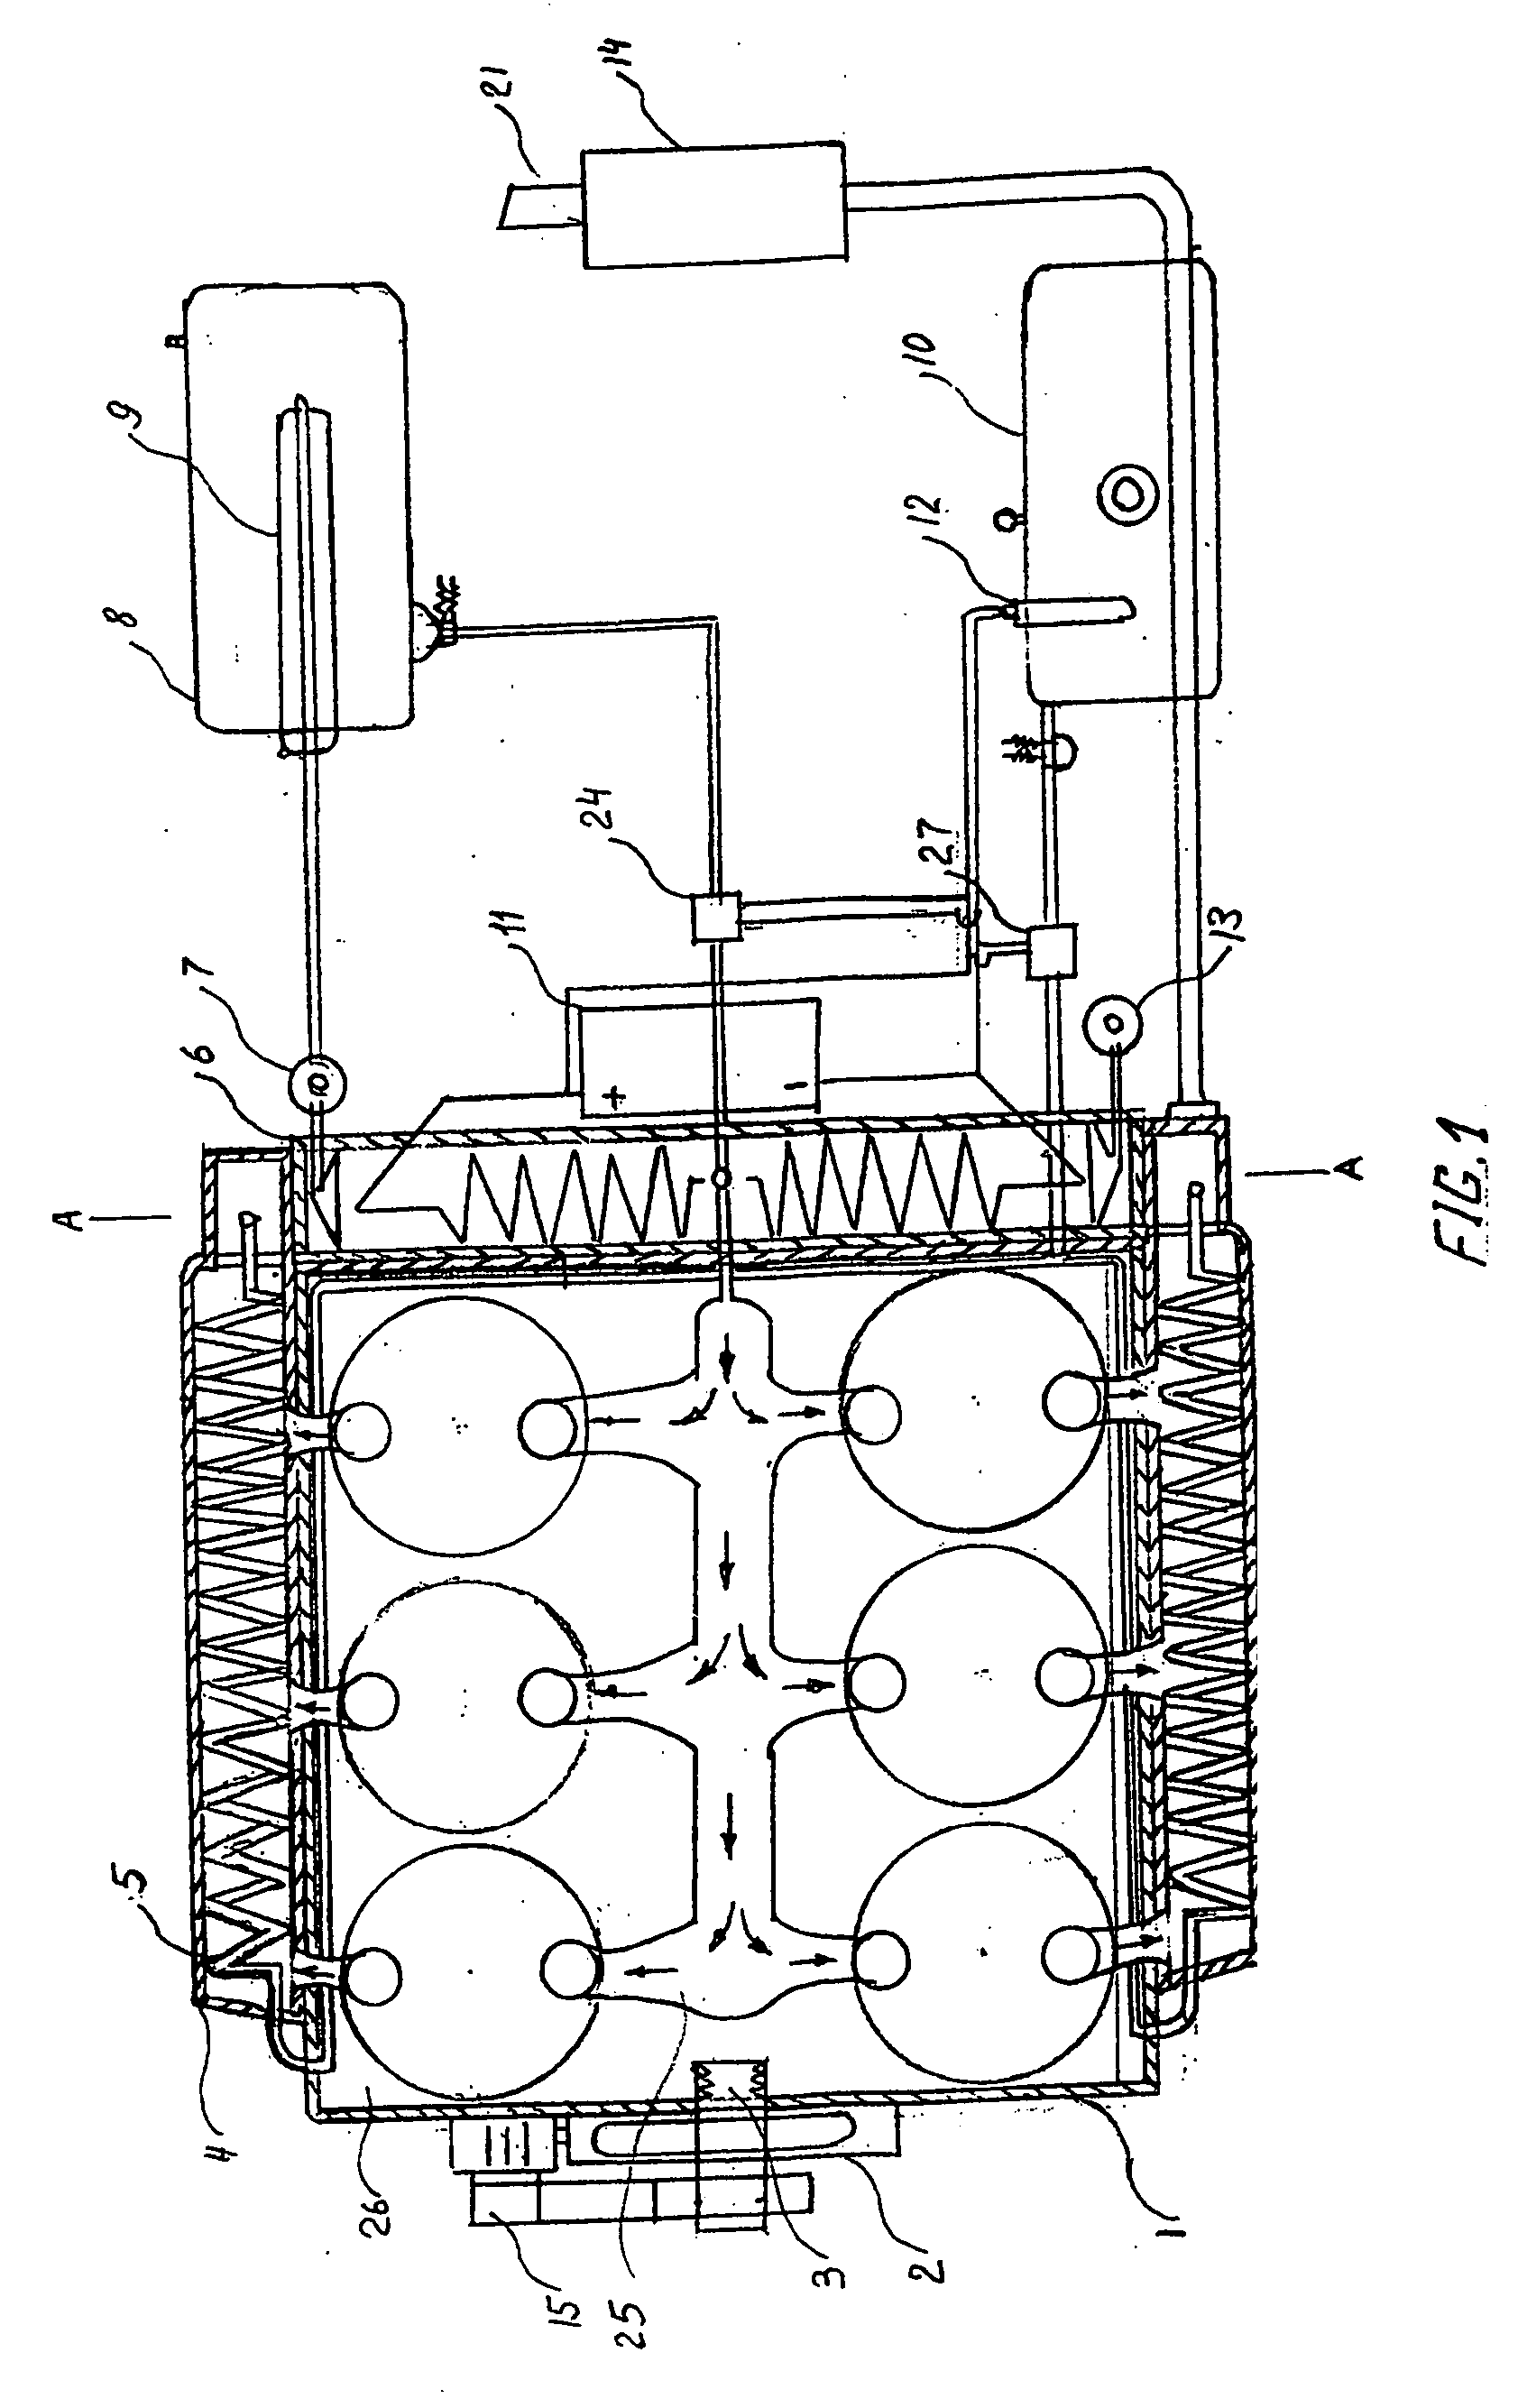 Hydrogen and oxygen production and accumulating apparatus including an internal combustion engine and method